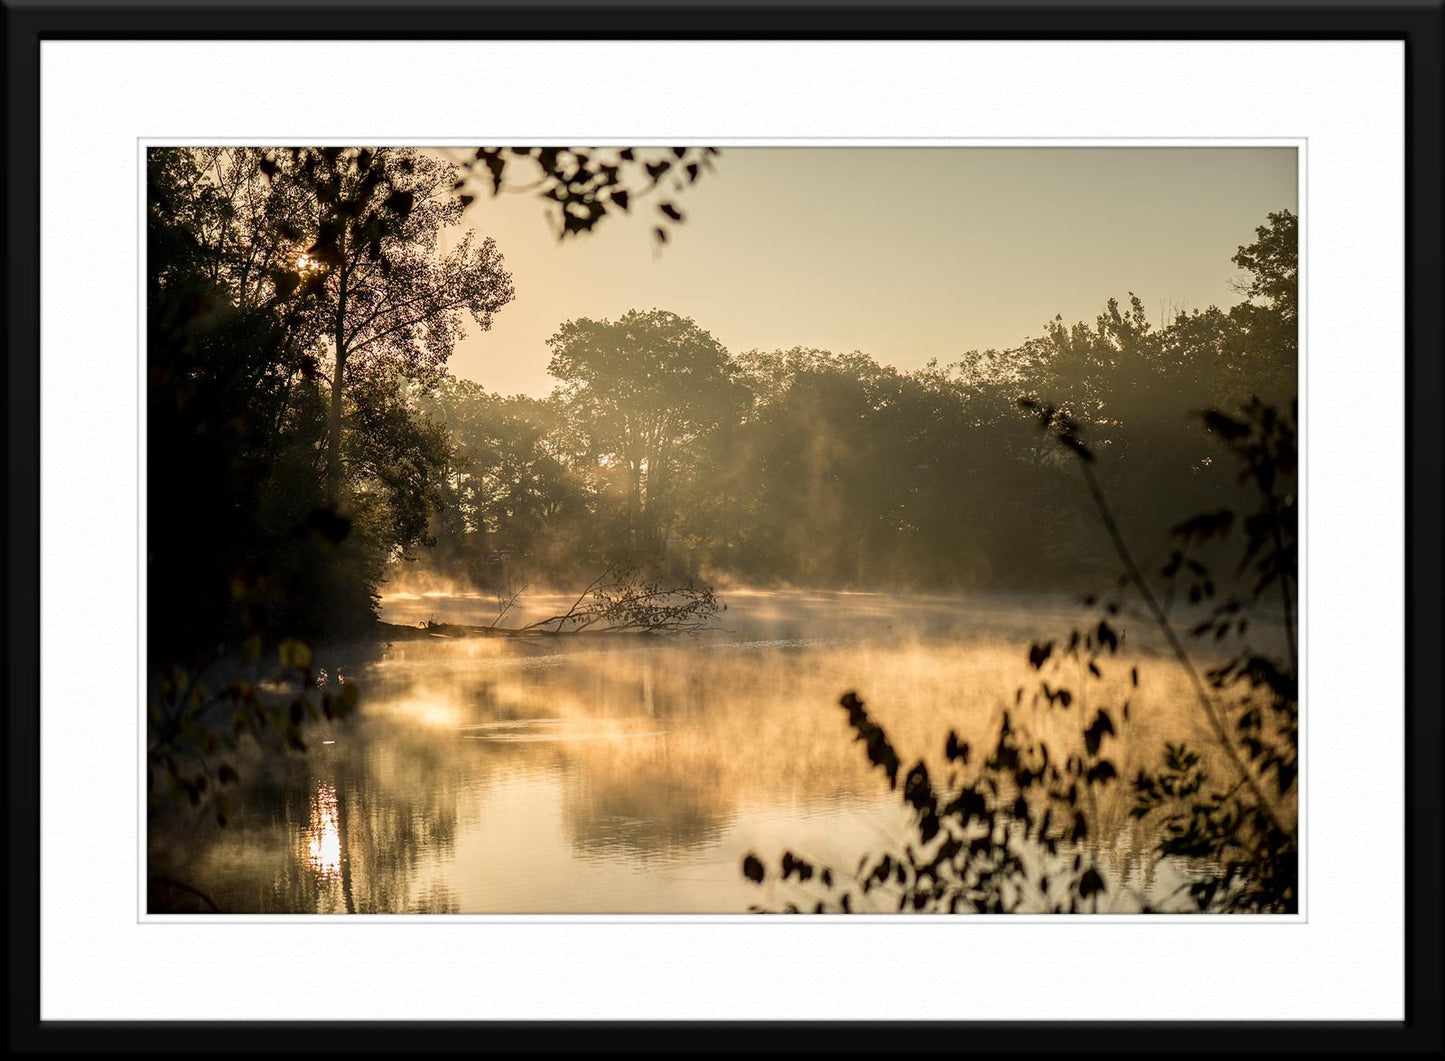 Fine Art Landscape Photography of Early morning fog on a lake